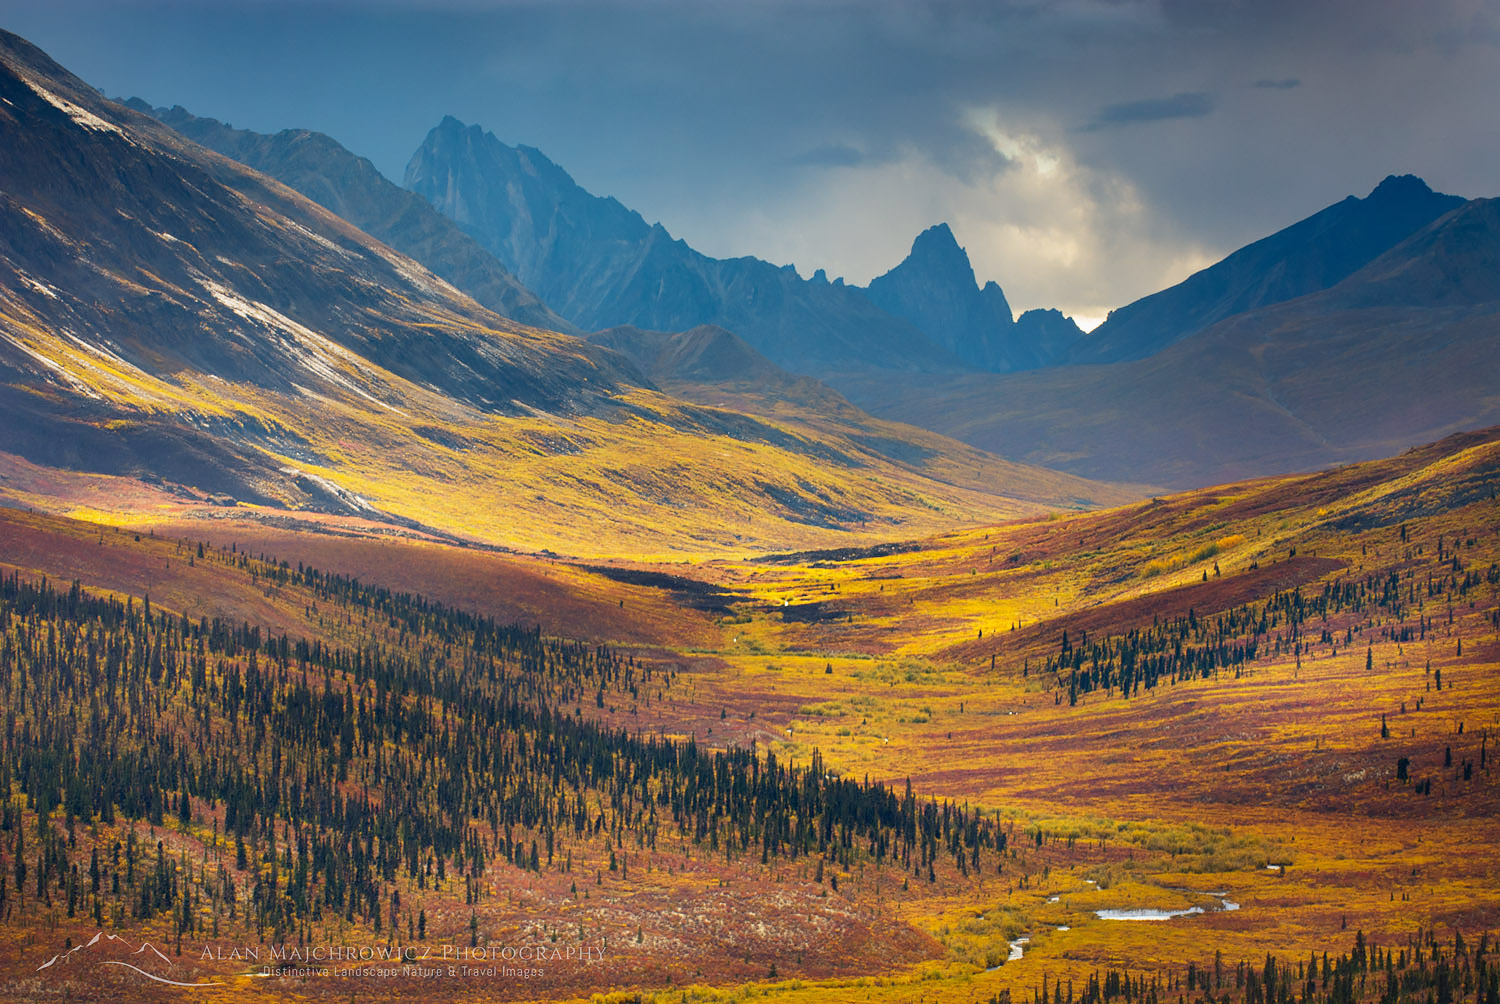 North Klondike River Valley displaying colors of autumn foliage, Tombstone Territorial Park Yukon Canada #15494